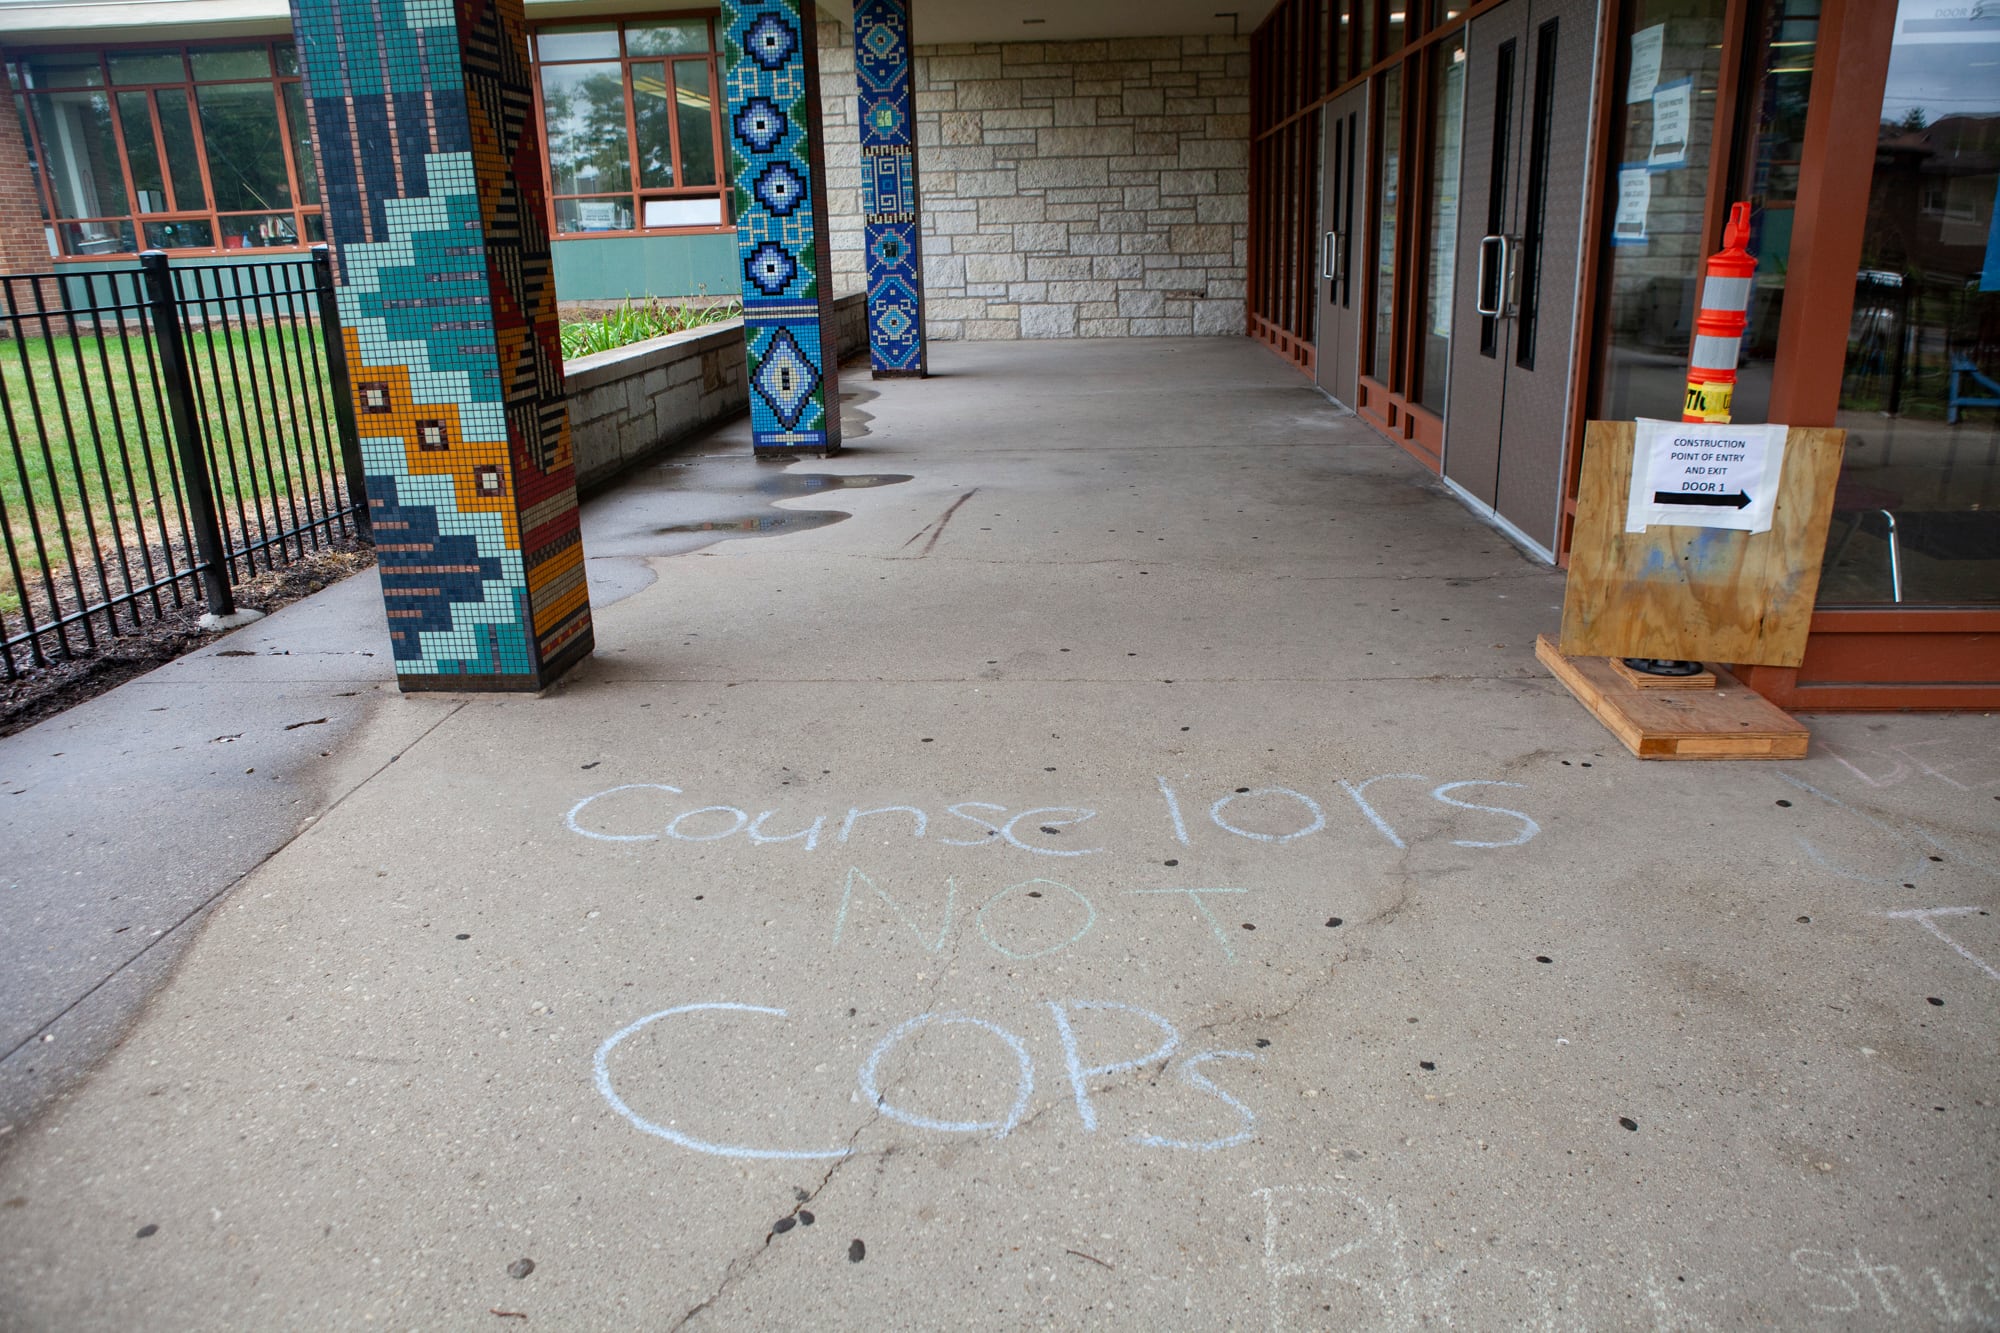 Chalk on the sidewalk outside of the school reads Counselors not cops.